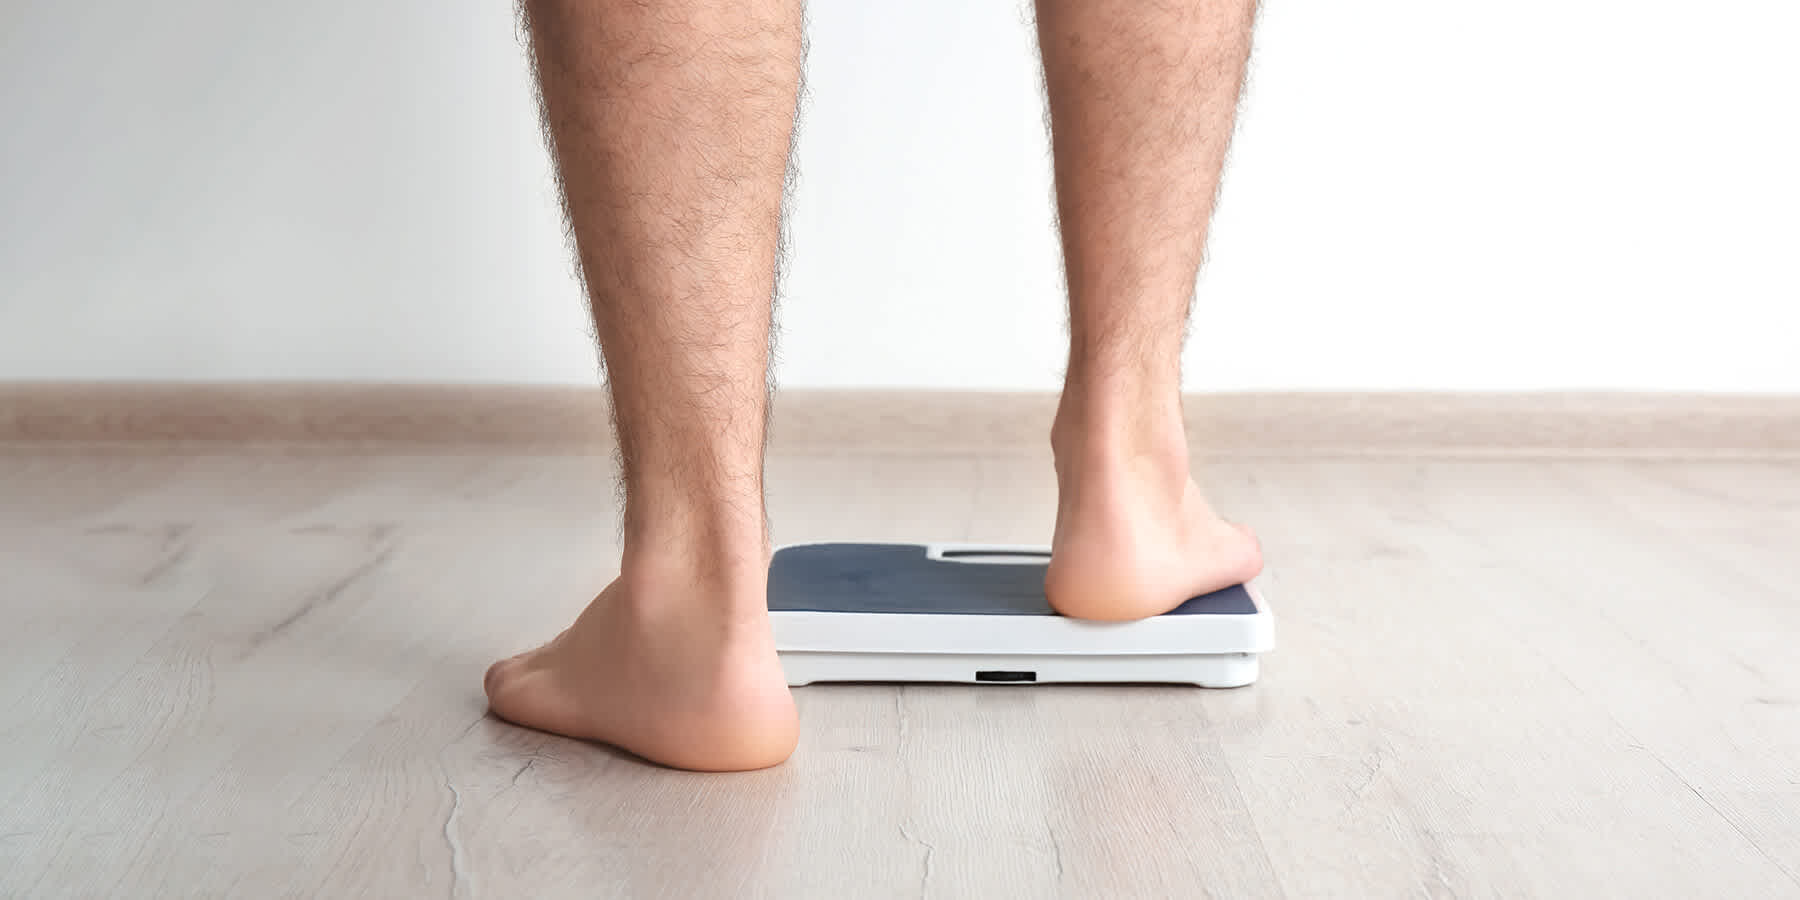 Man stepping onto bathroom scale while wondering about fat loss vs. weight loss